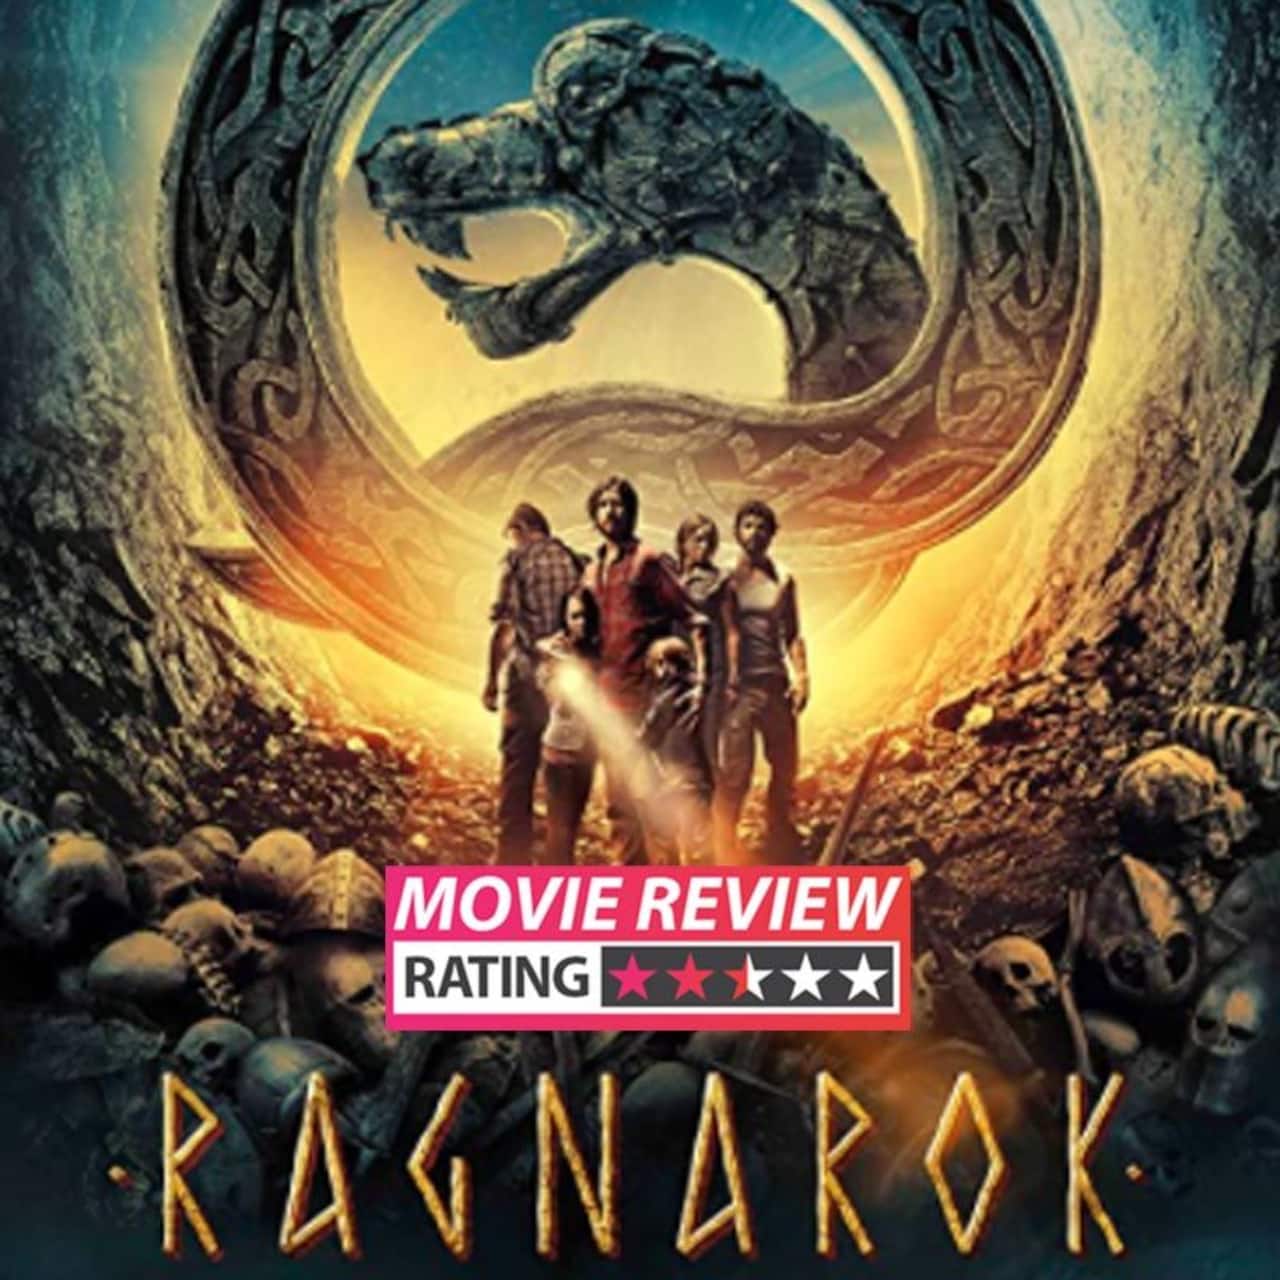 Ragnarok movie review: This Norwegian Anaconda clone has its terrifying moments, but isn't terrifying enough on the whole